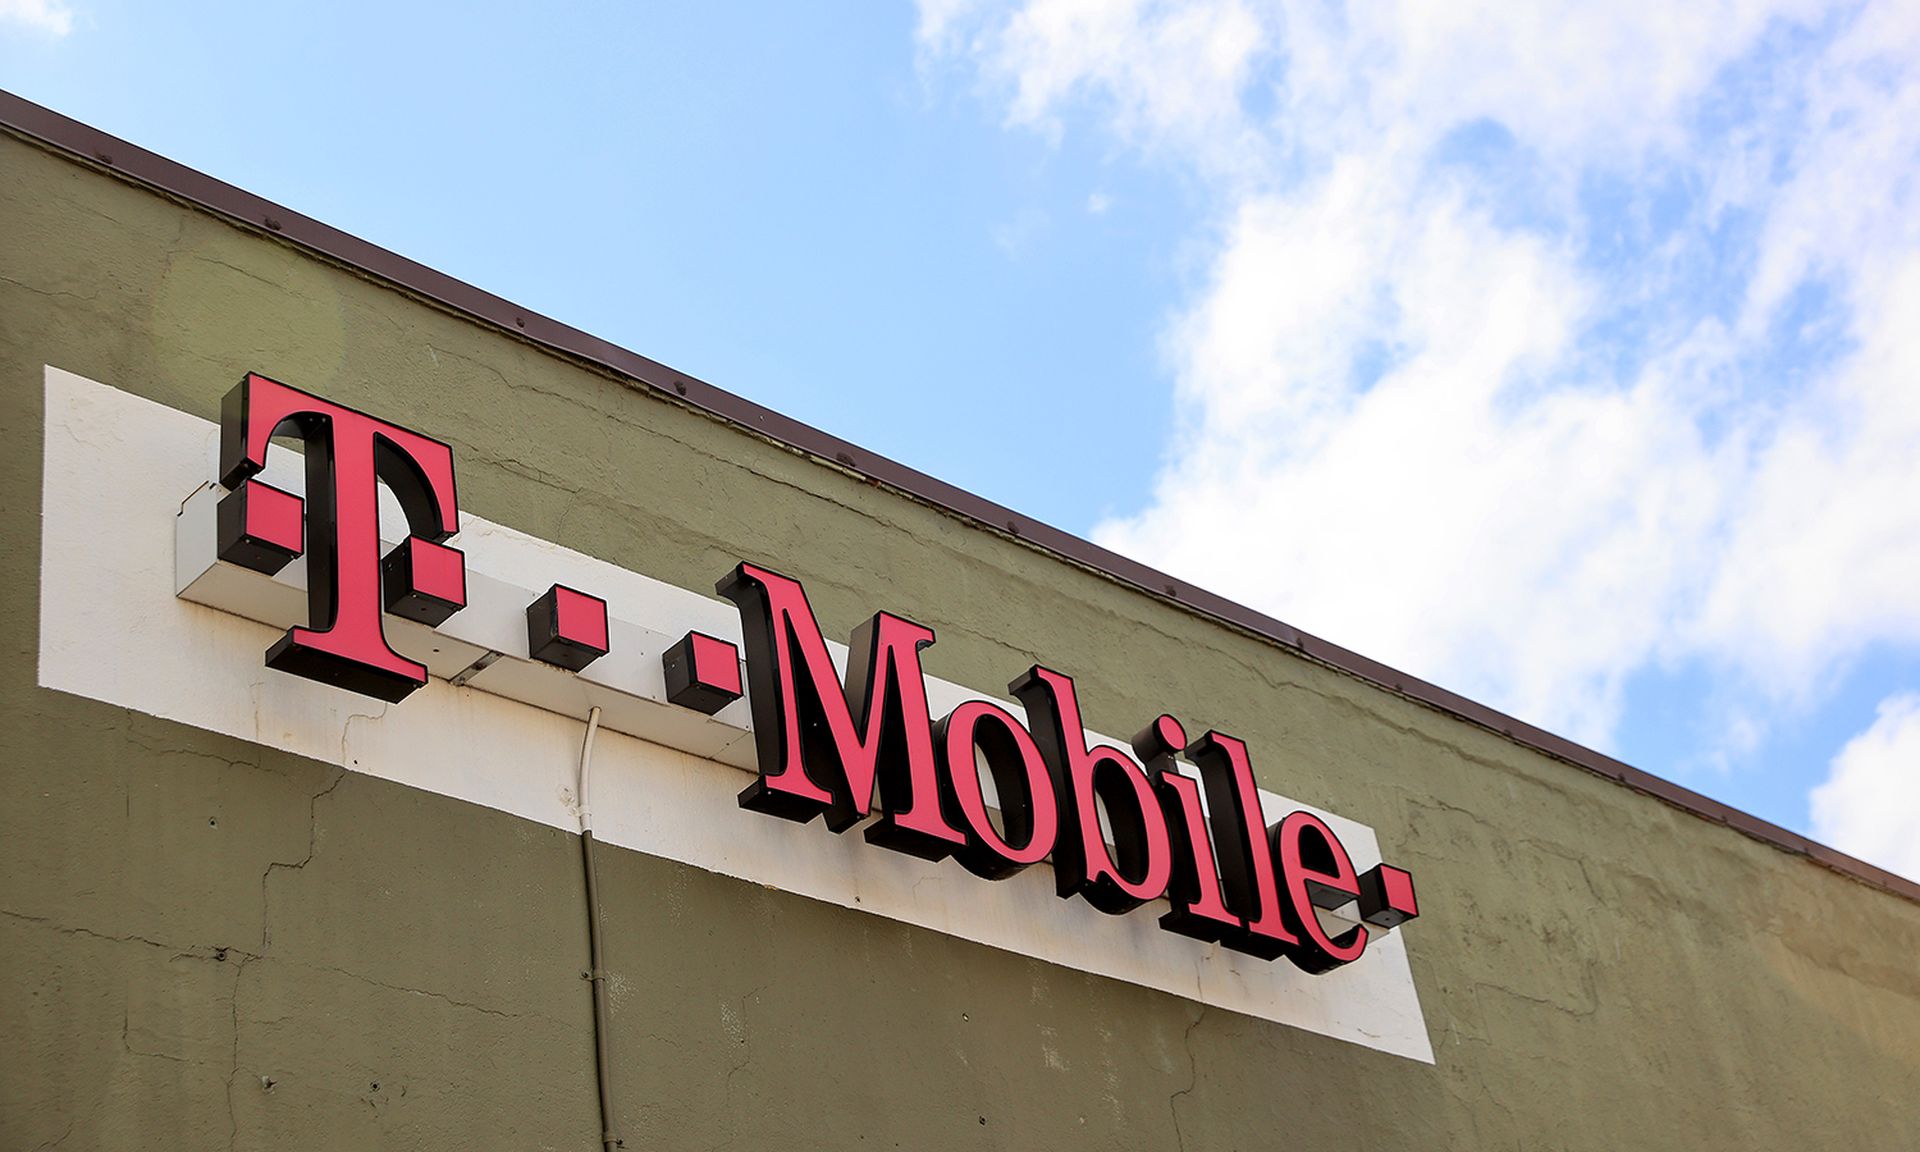 A T-Mobile retail store is seen Aug. 18, 2021, in Arlington, Va. (Photo by Chip Somodevilla/Getty Images)